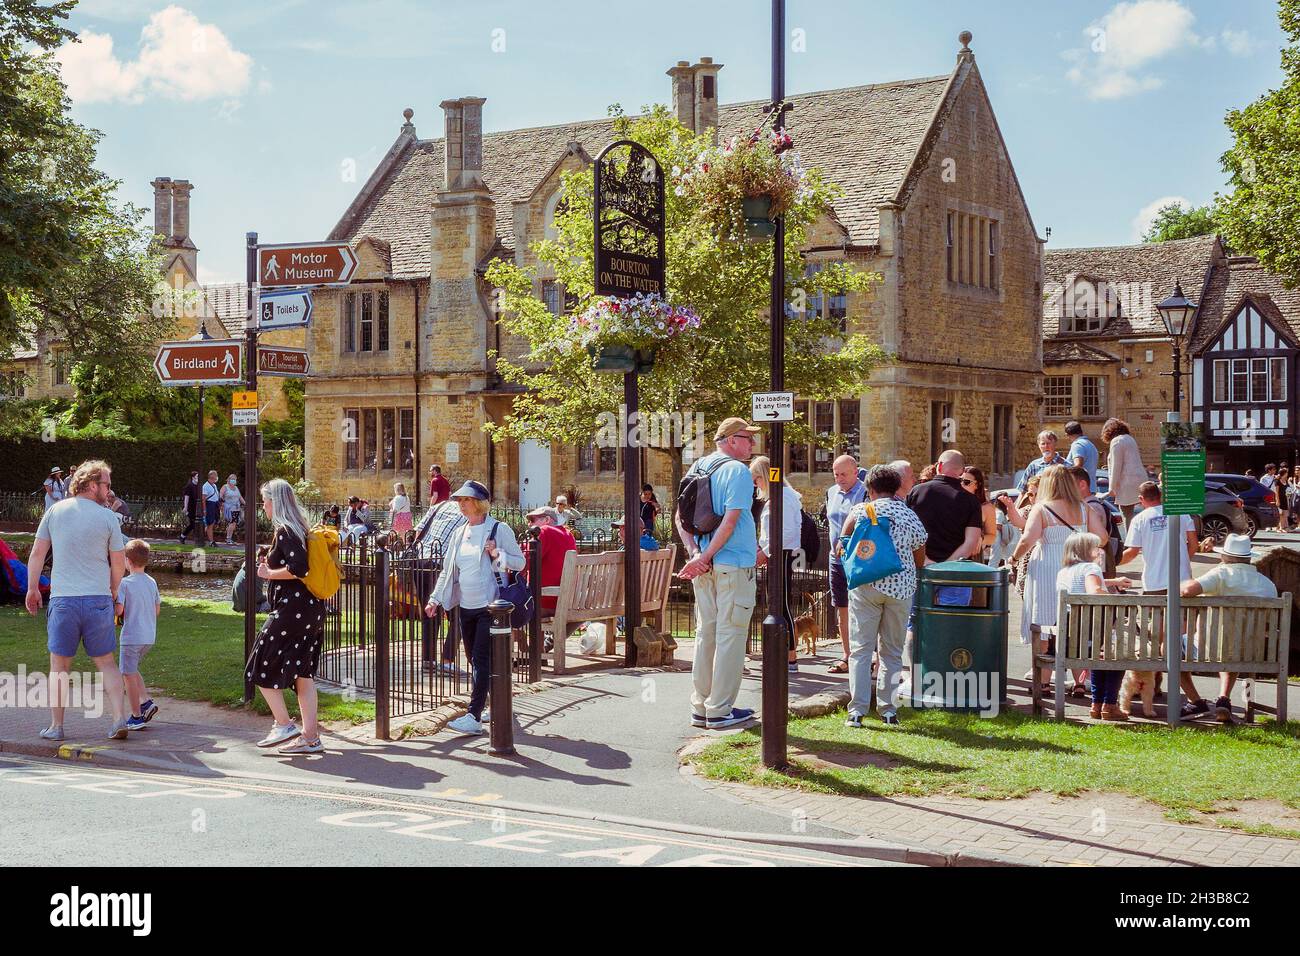 Crowds of visitors enjoying a sunny day in Bourton On The Water, a picturesque village in The Cotswolds, United Kingdom. Stock Photo